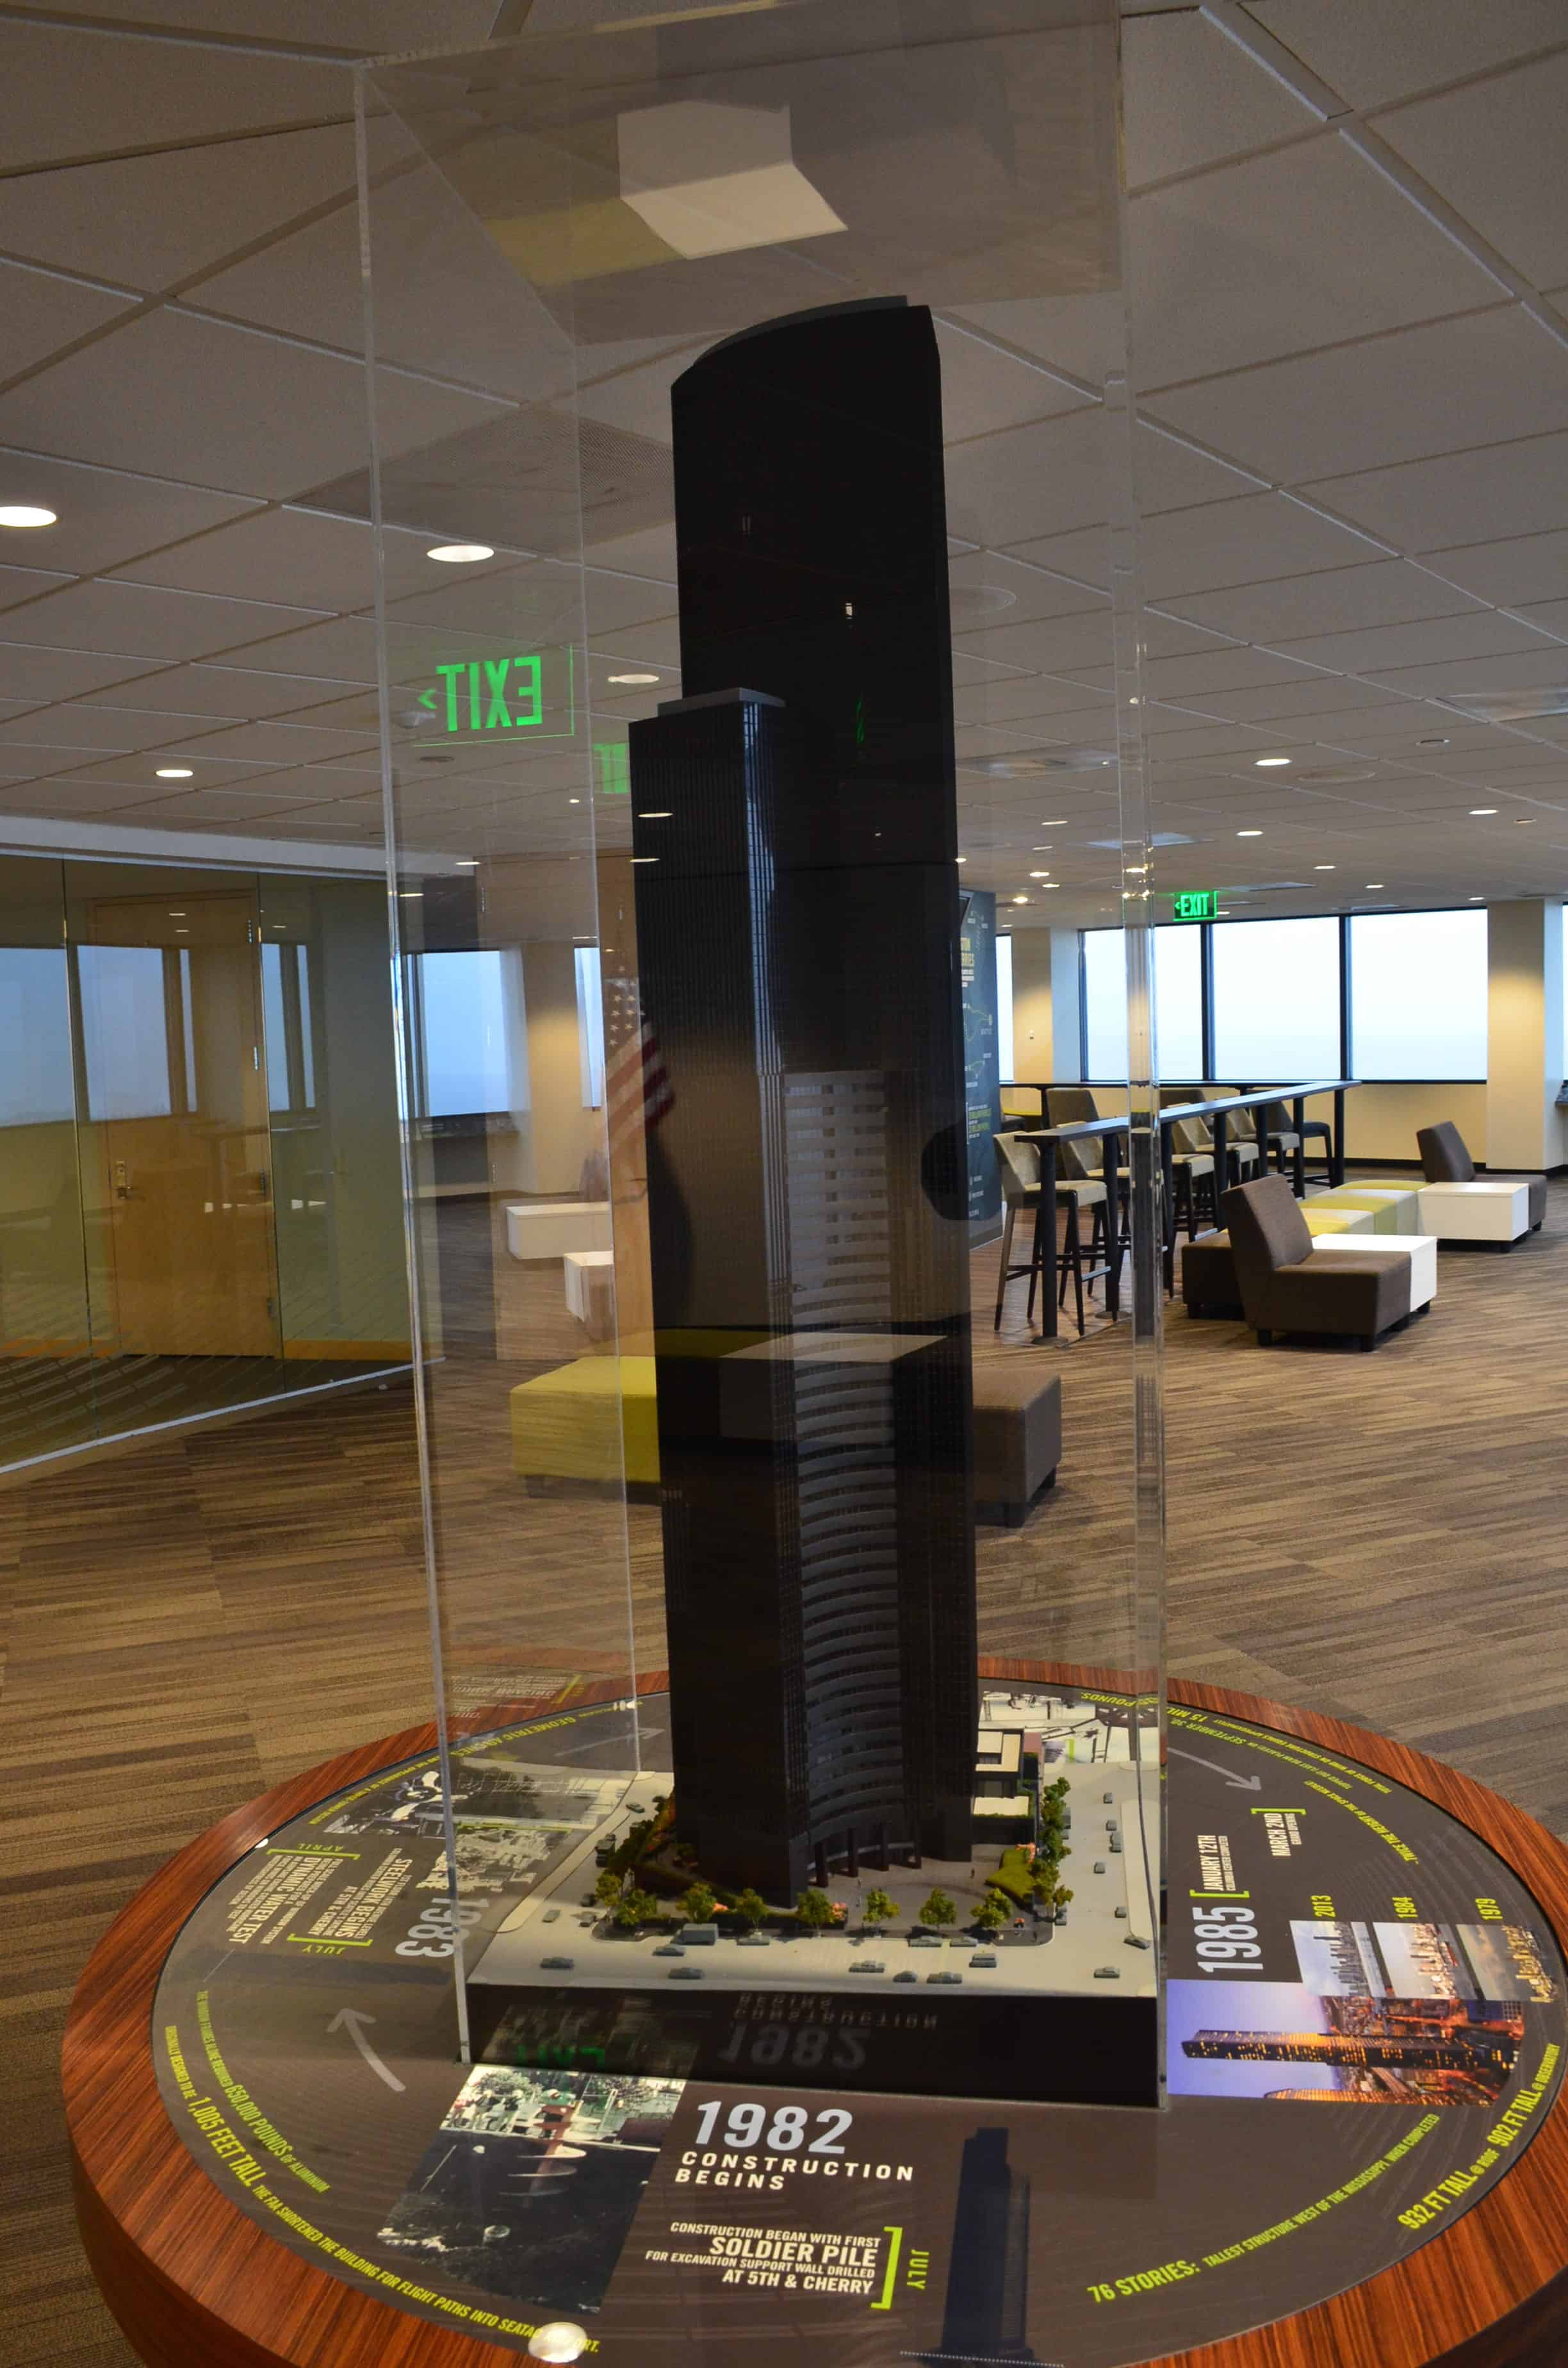 Model of the building at Columbia Center in Seattle, Washington